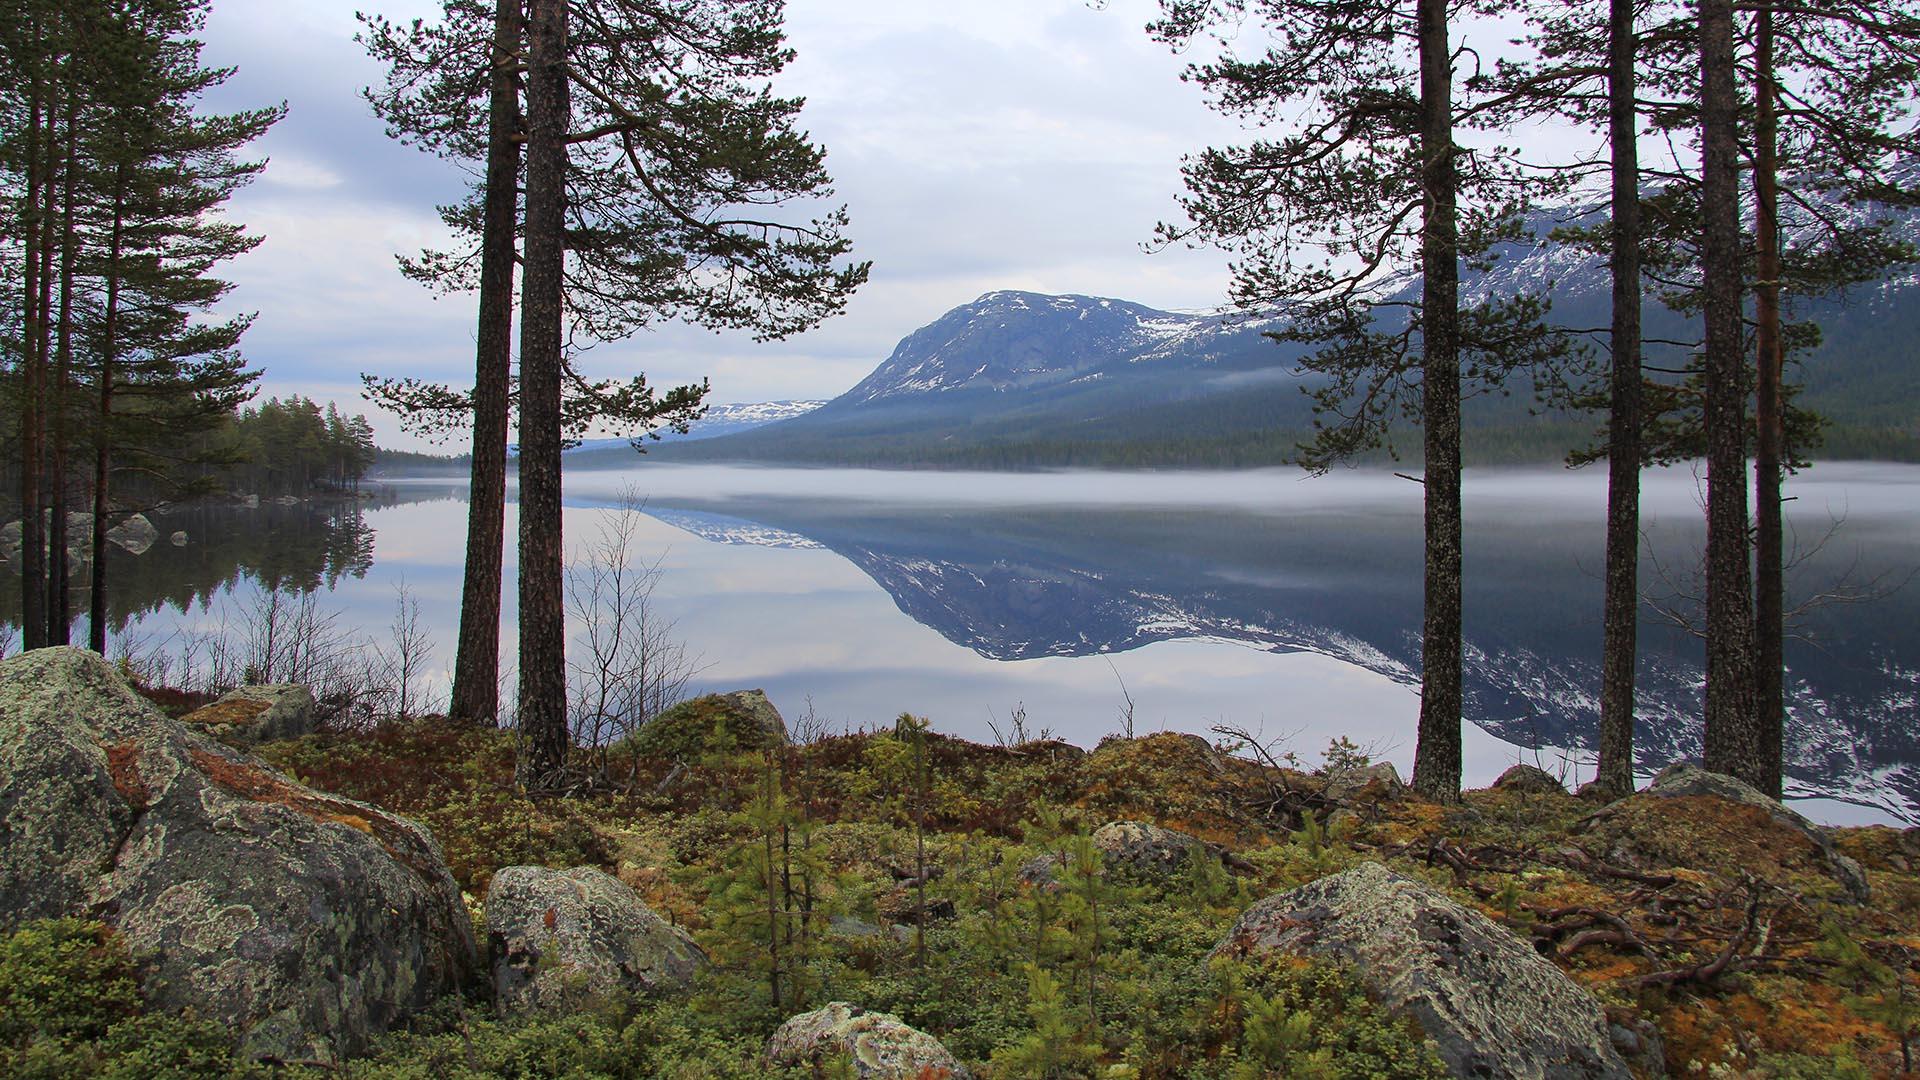 View on an overcast day past the trunks of a few pine trees over a lake with a mountain on the far side. The forest floor is overgrown with blueberry heather, and the rocks with lichens.